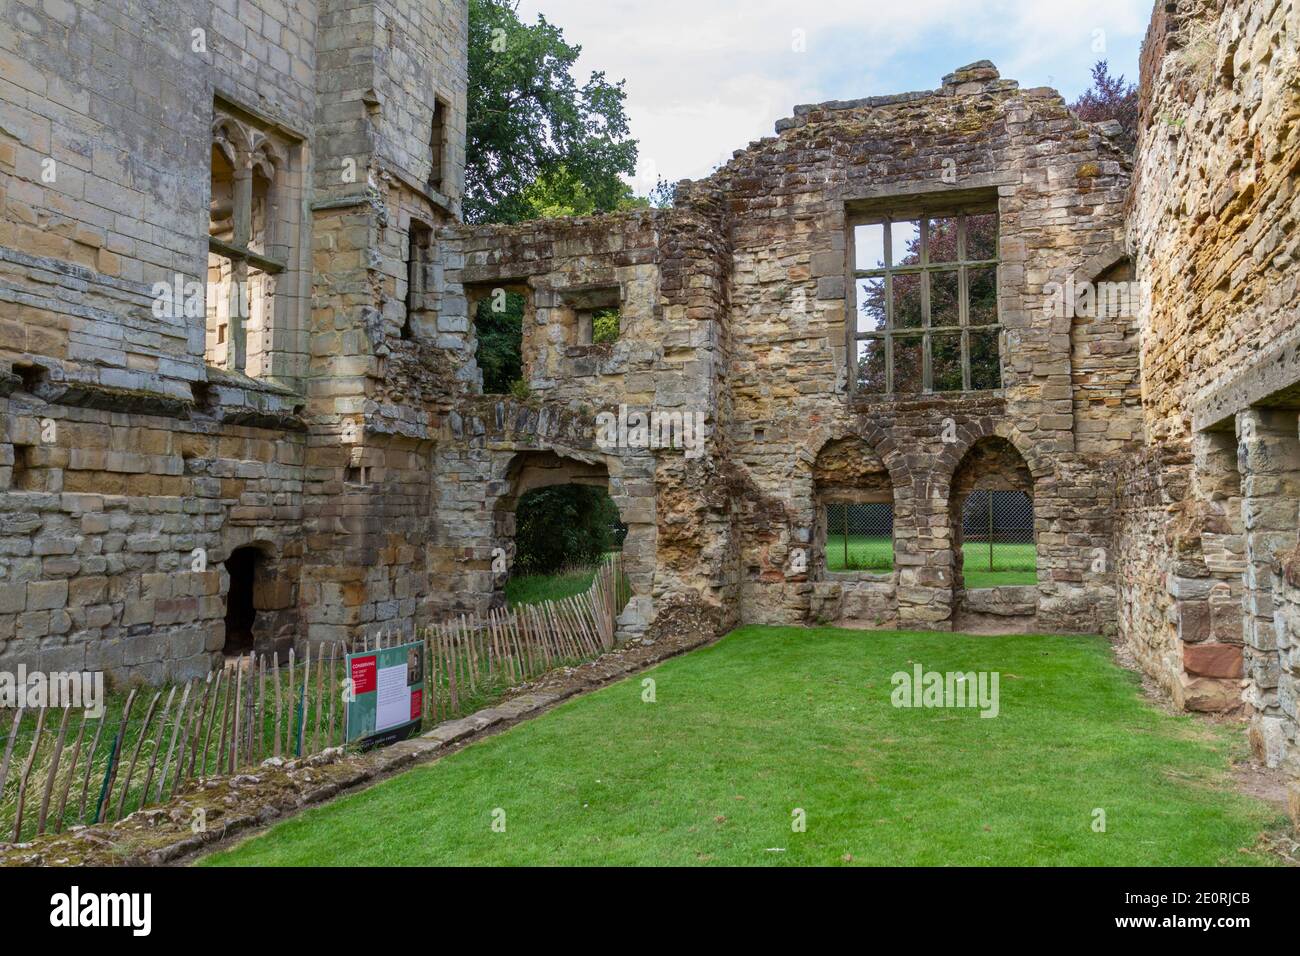 Die Buttery und Speisekammer in Ashby de la Zouch Castle, Ashby-de-la-Zouch, Leicestershire, England. Stockfoto